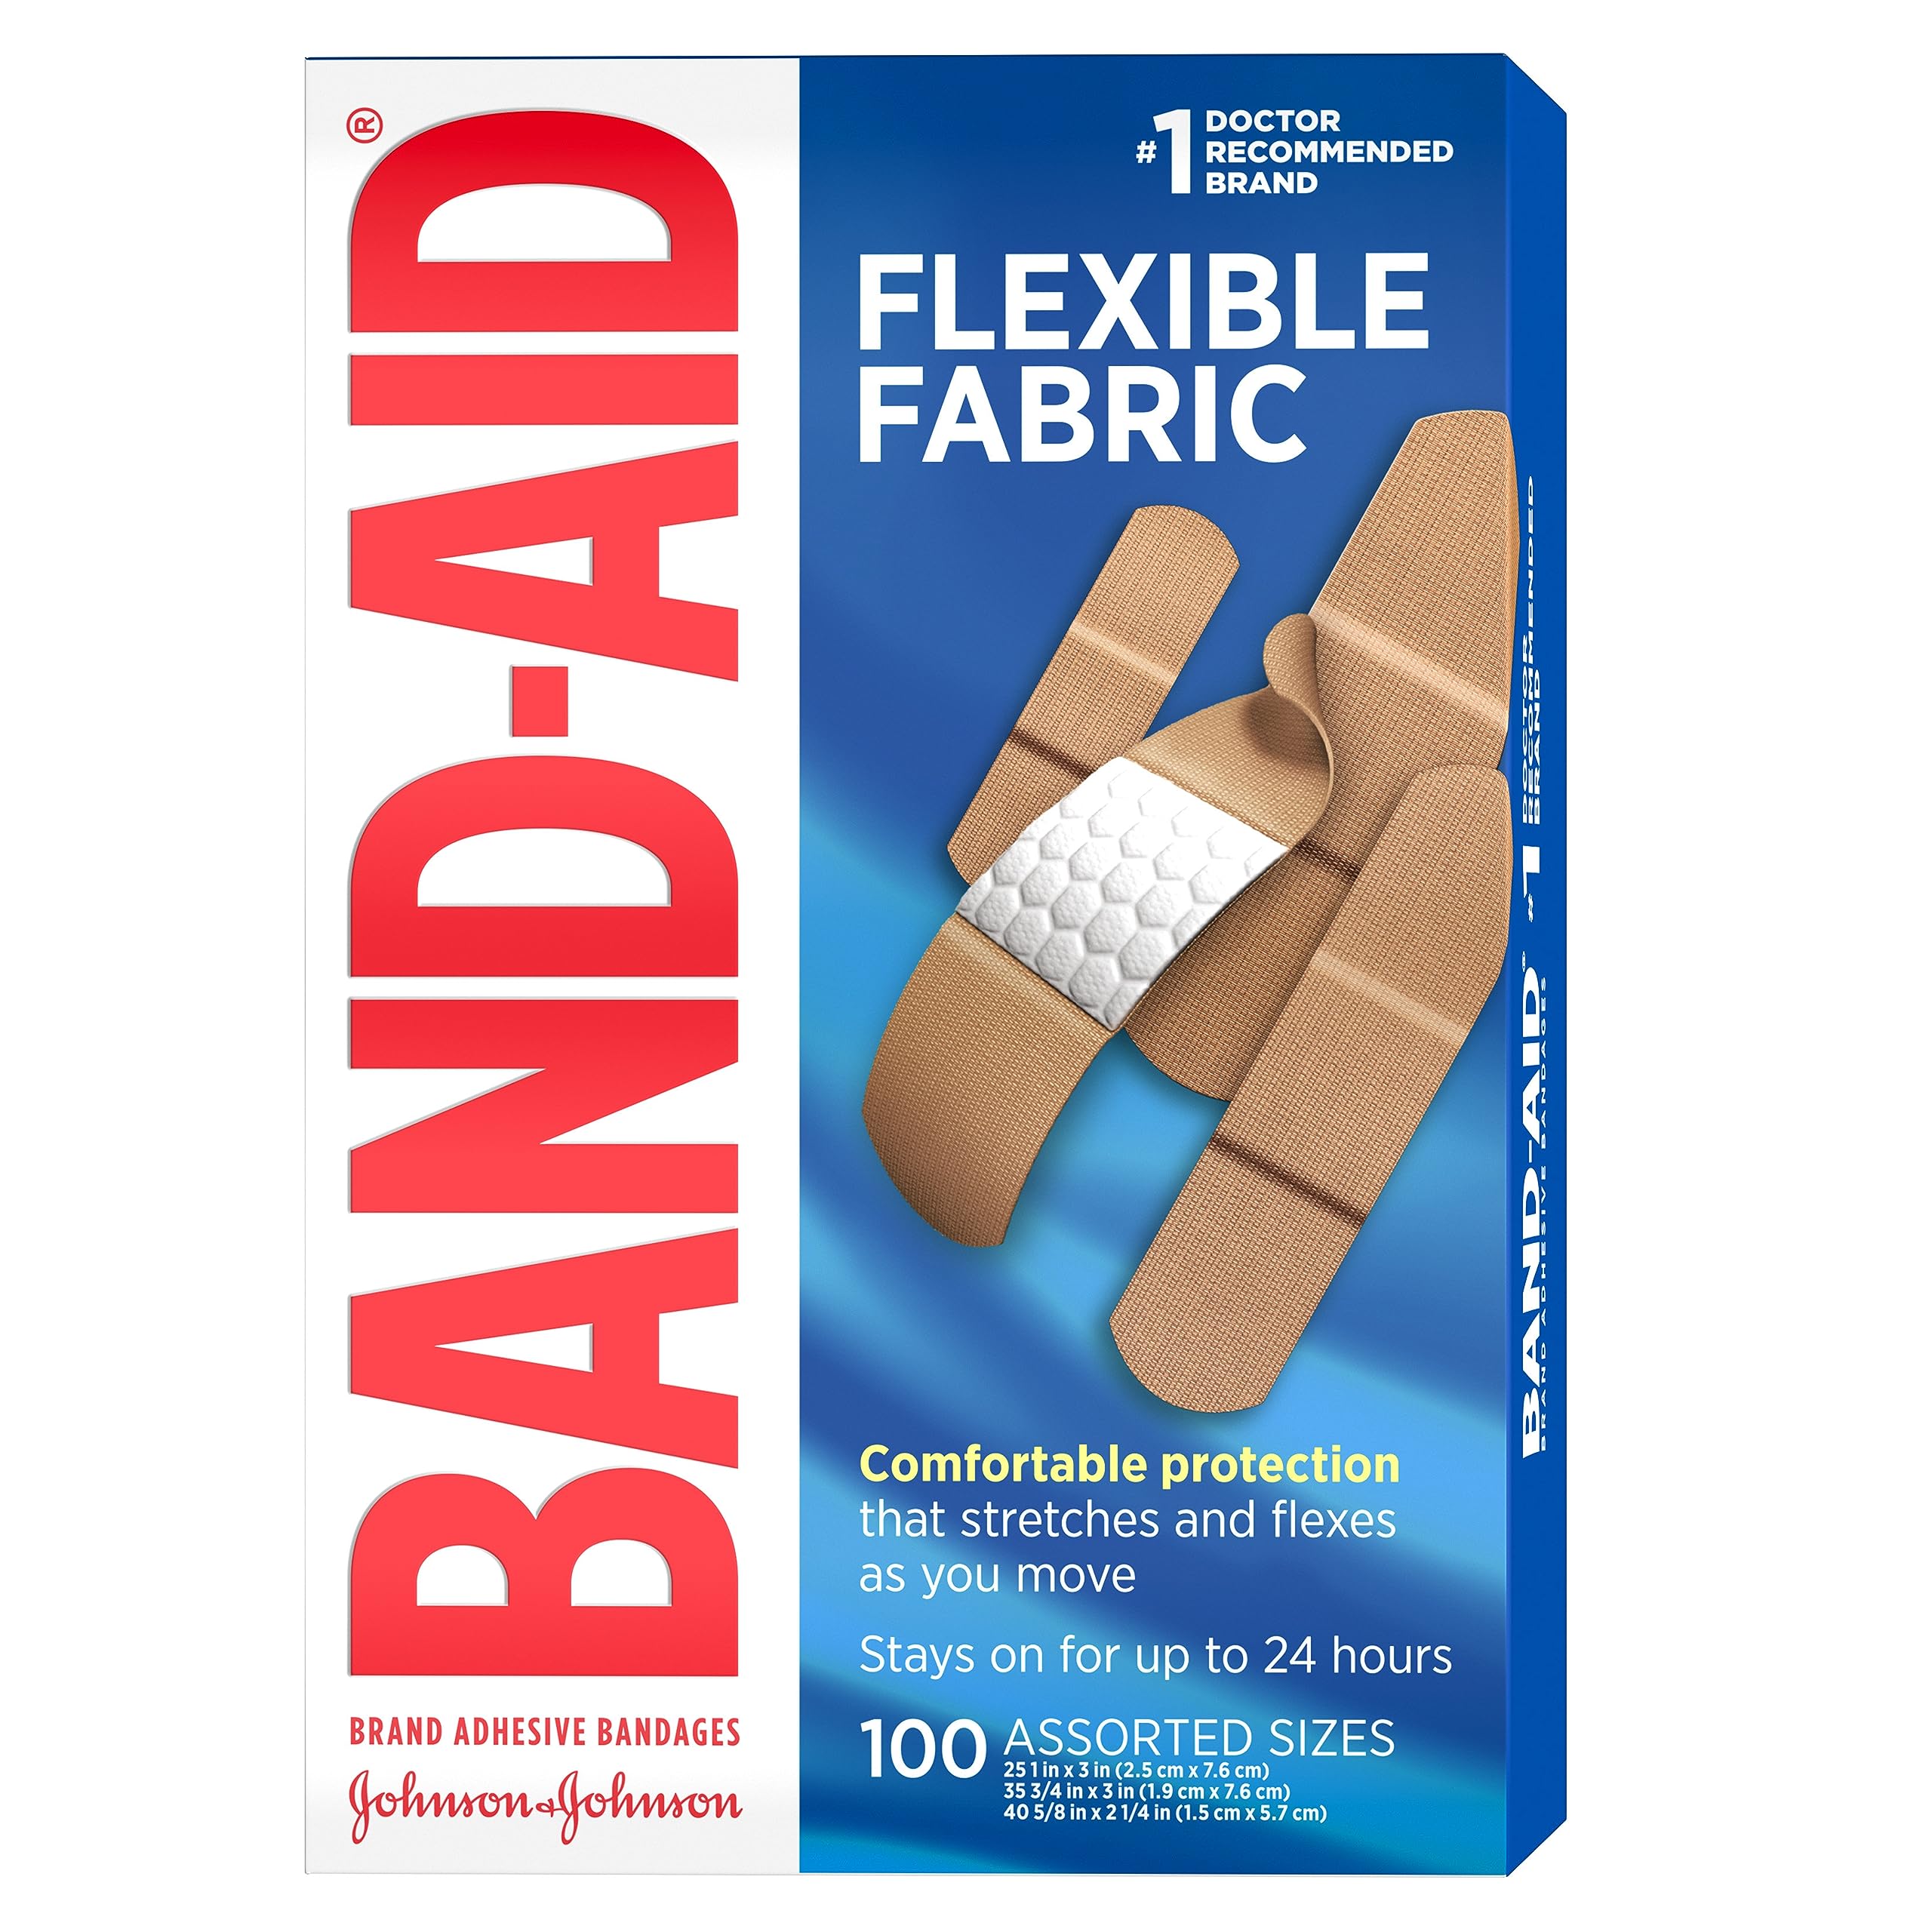 Band-Aid Brand Flexible Fabric Adhesive Bandages for Comfortable Flexible Protection & Wound Care of Minor Cuts, Scrapes, & Wounds, Assorted Sizes, Twin Pack, 2 x 100 ct